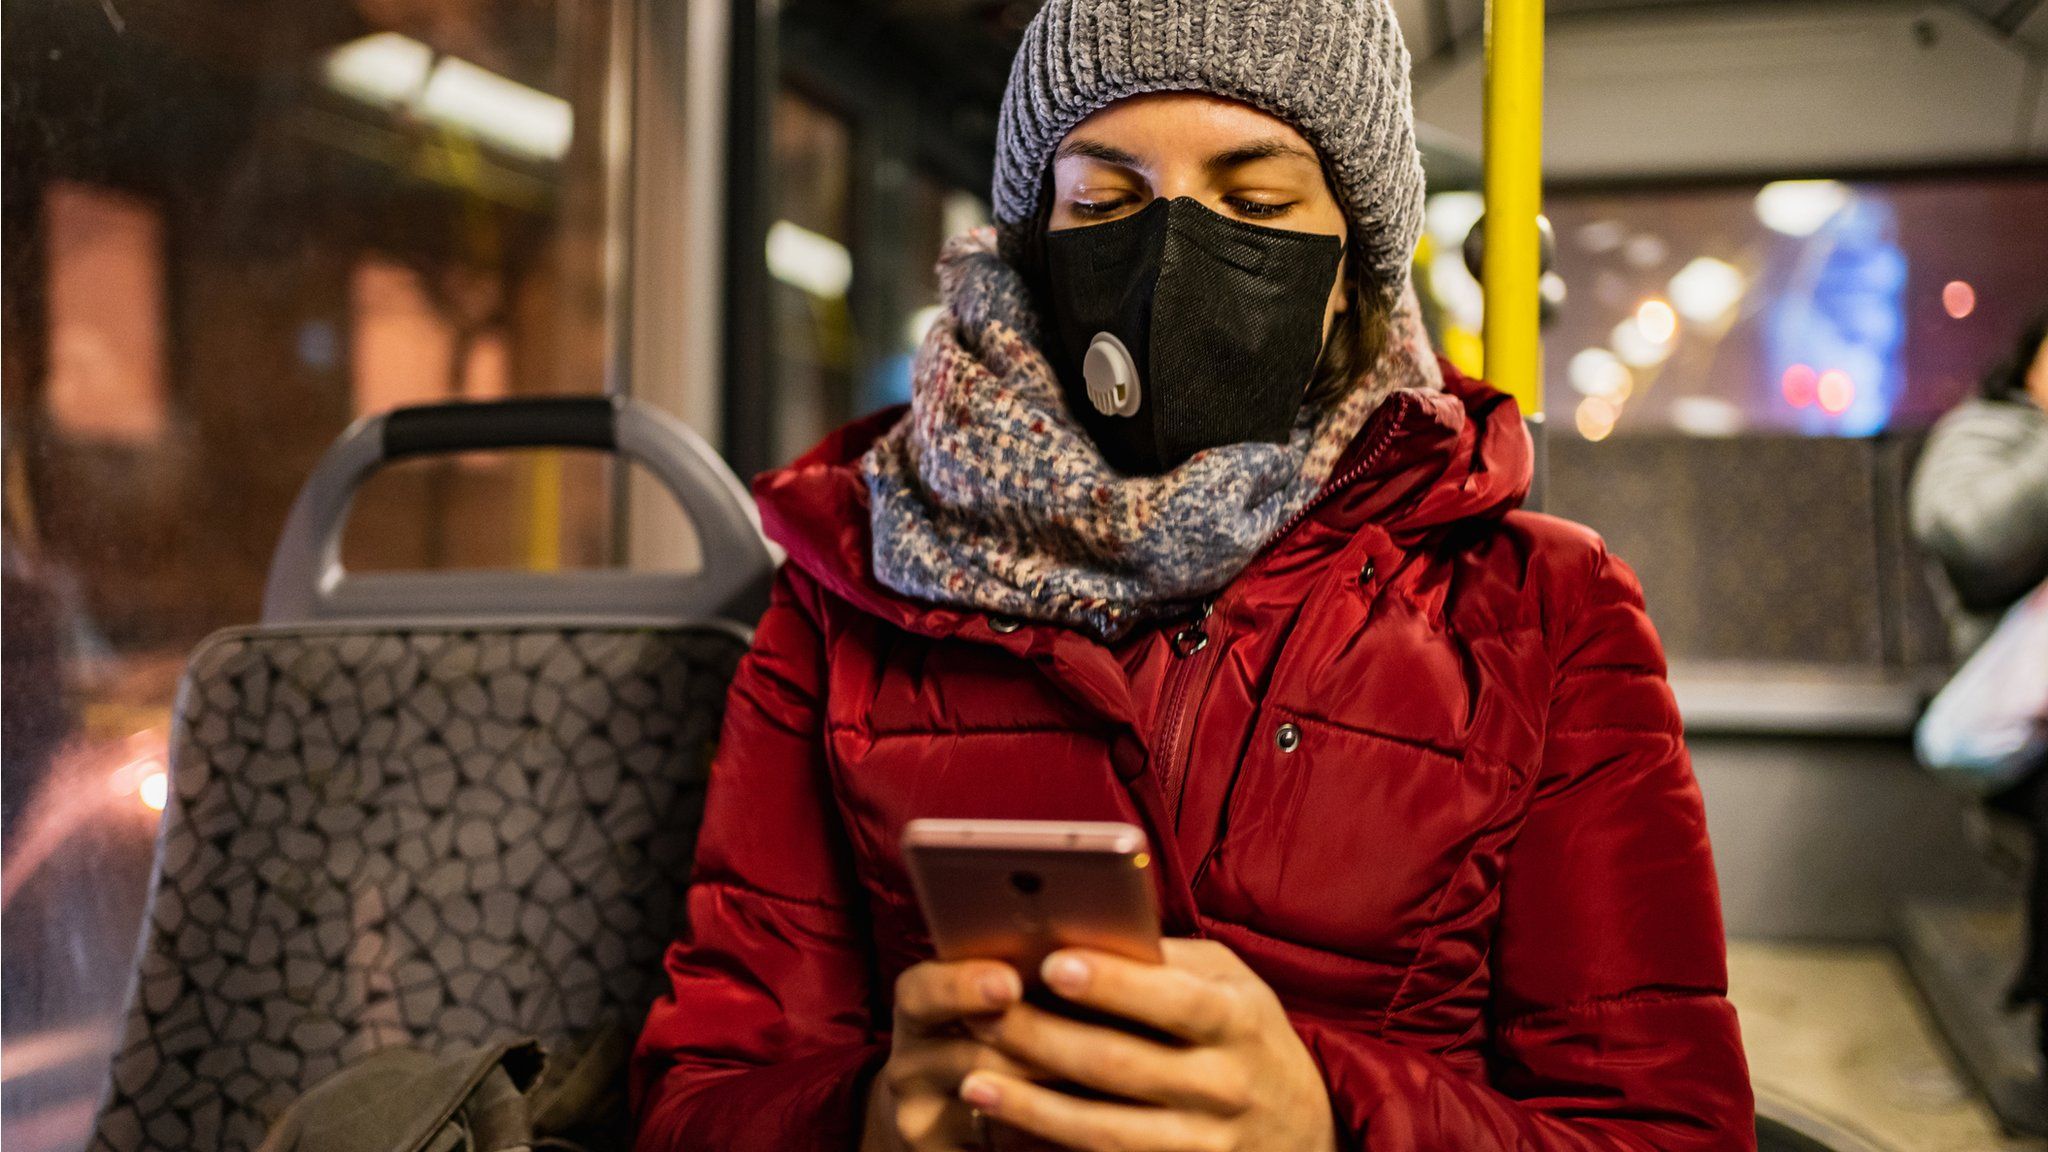 Woman wearing a mask on a bus in winter